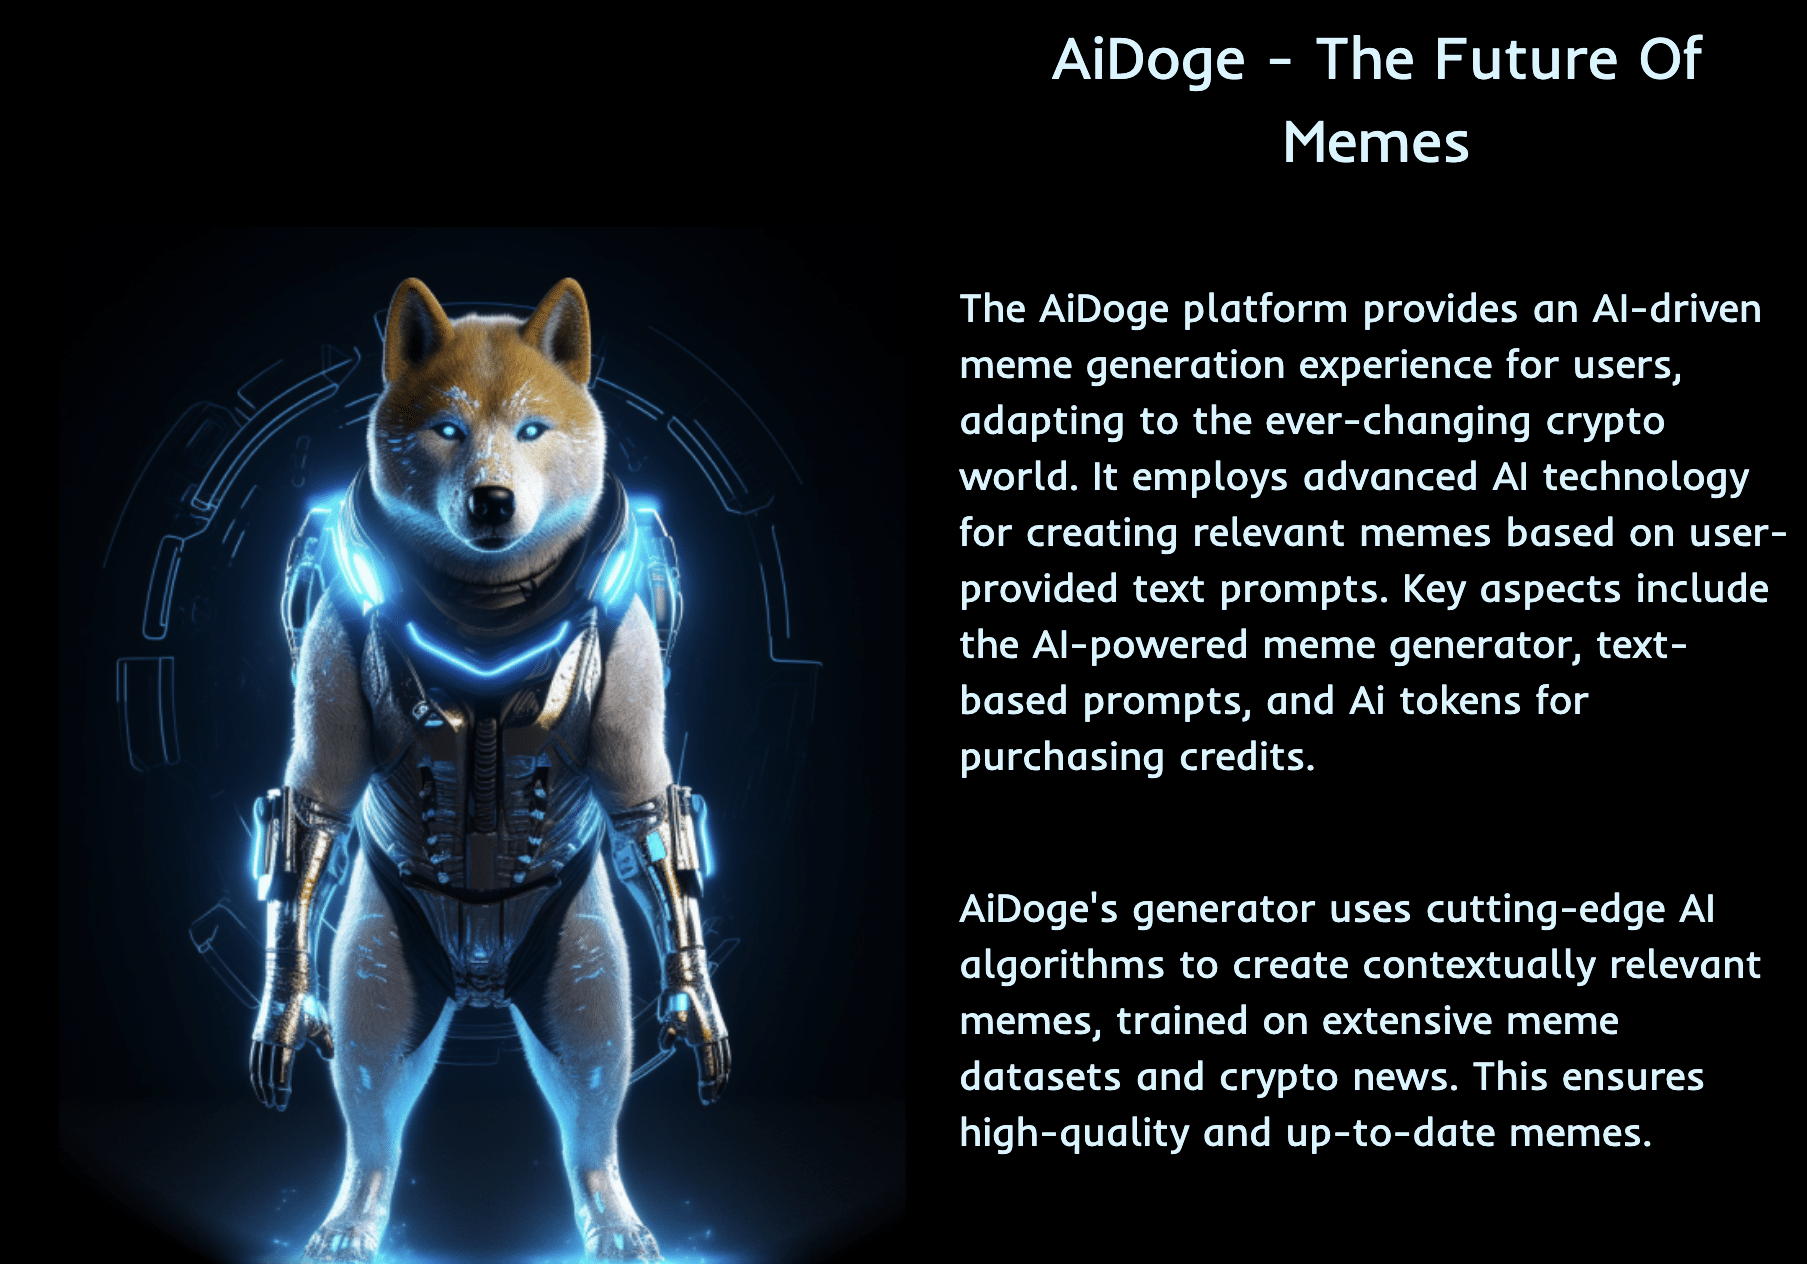 AiDoge is the future of memes